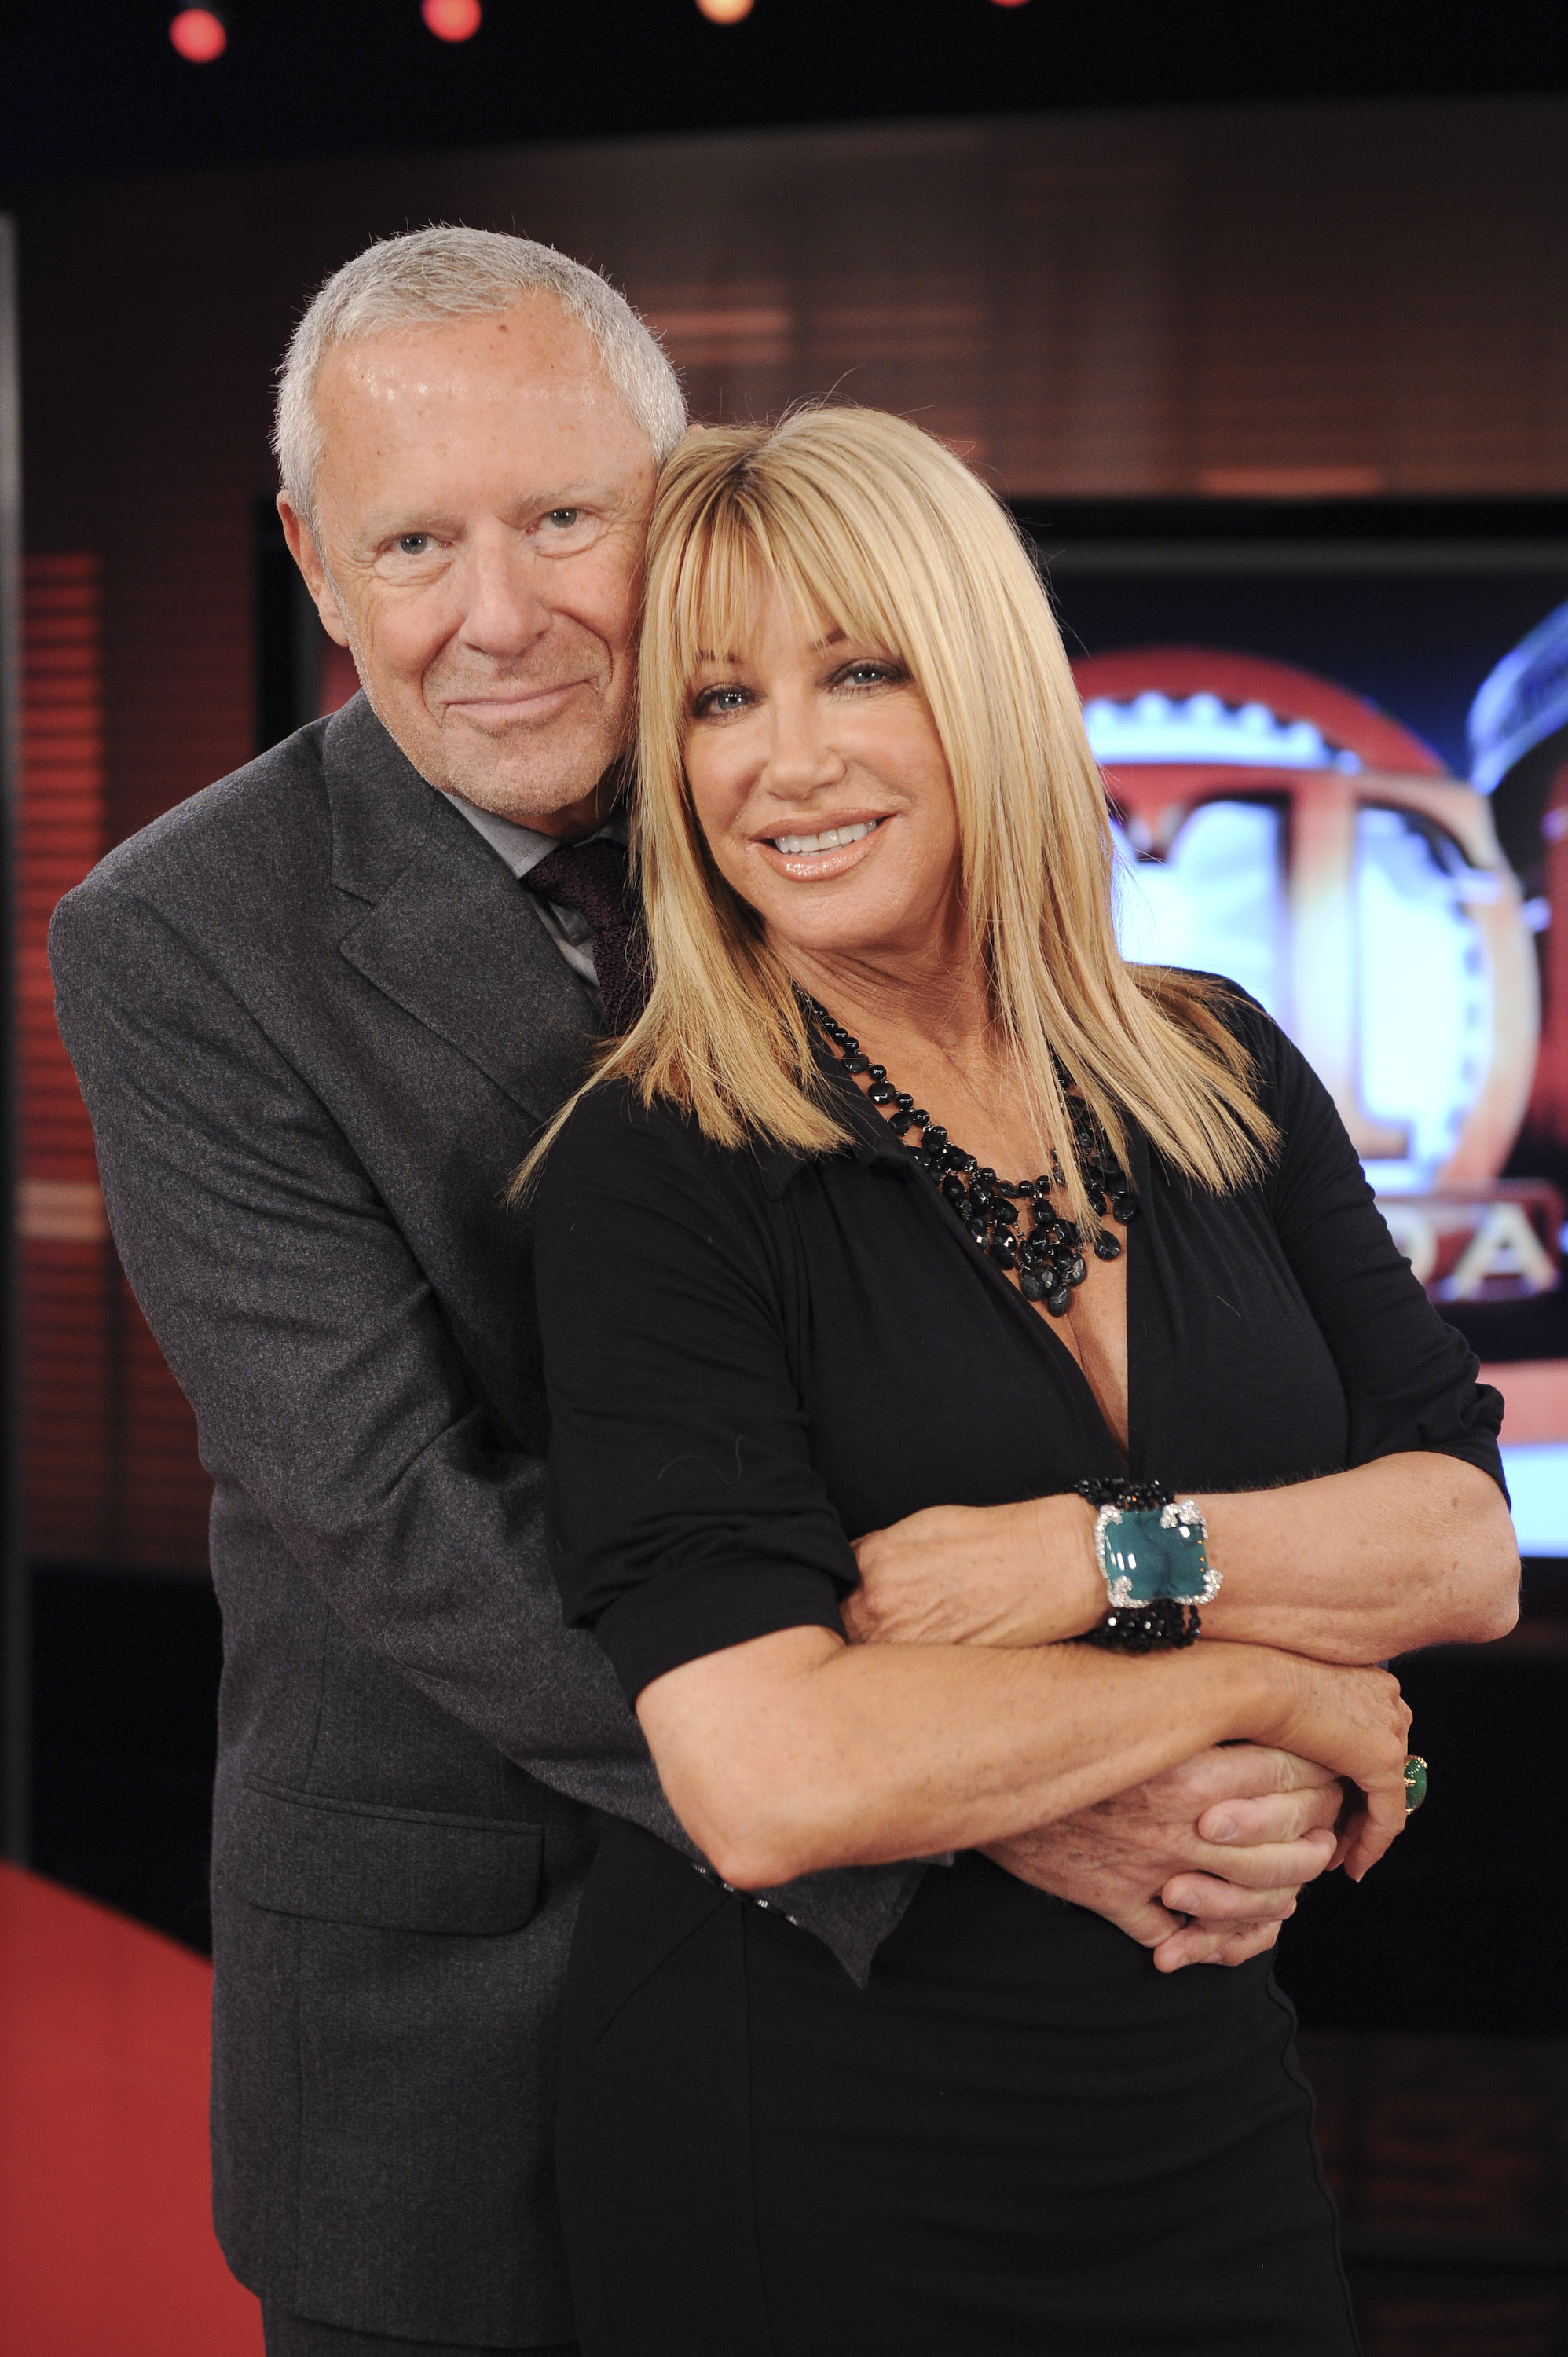 Alan Hamel and Suzanne Somers on "ET Canada" to promote Somers' book "Knockout" in 2009 | Source: Getty Images